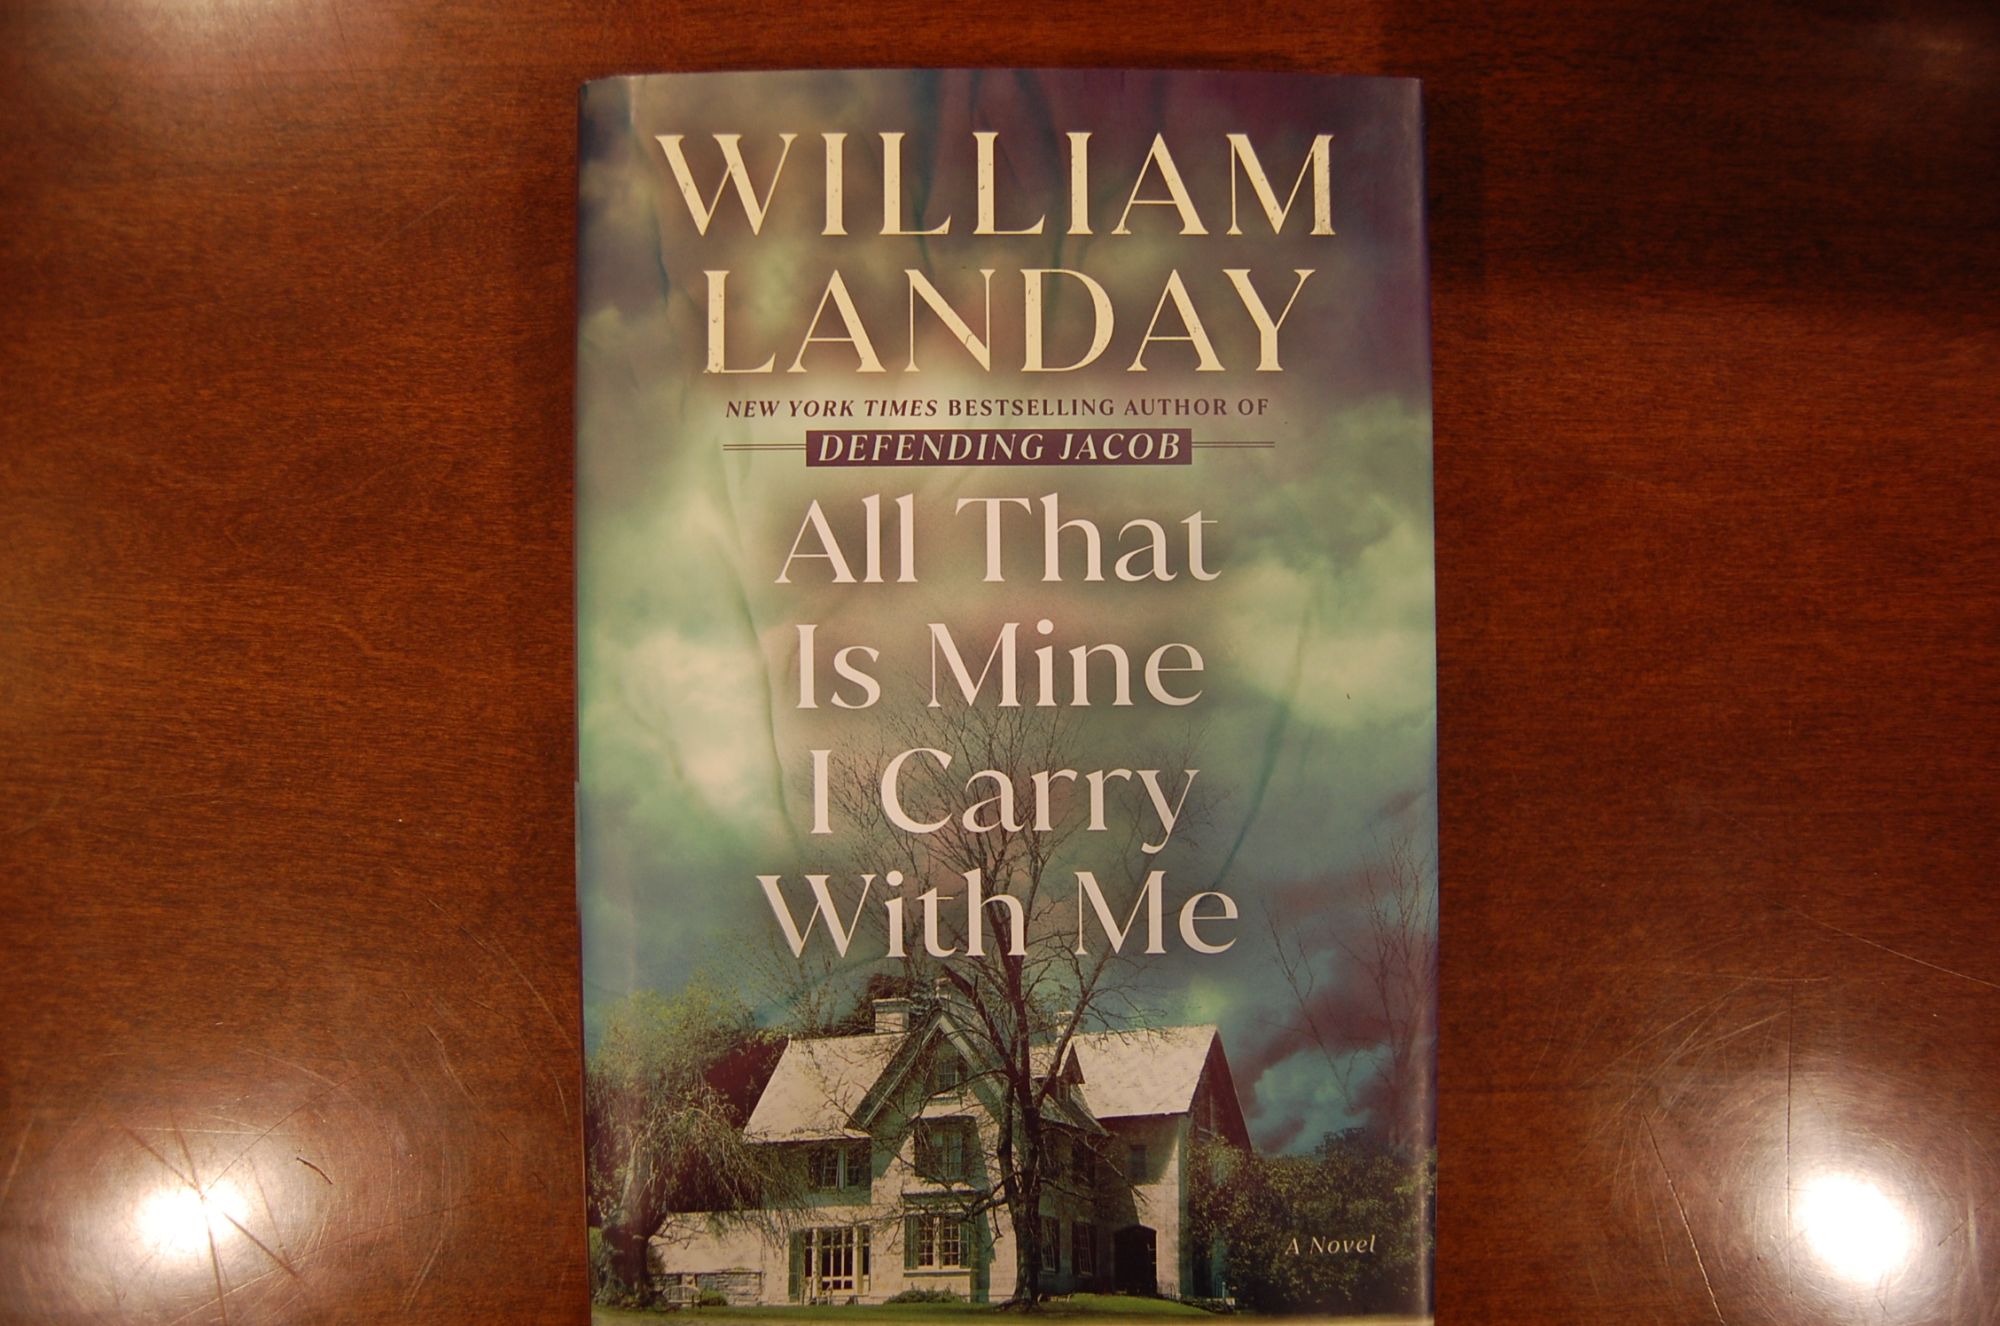 All That Is Mine I Carry With Me by William Landay: 9780345531841